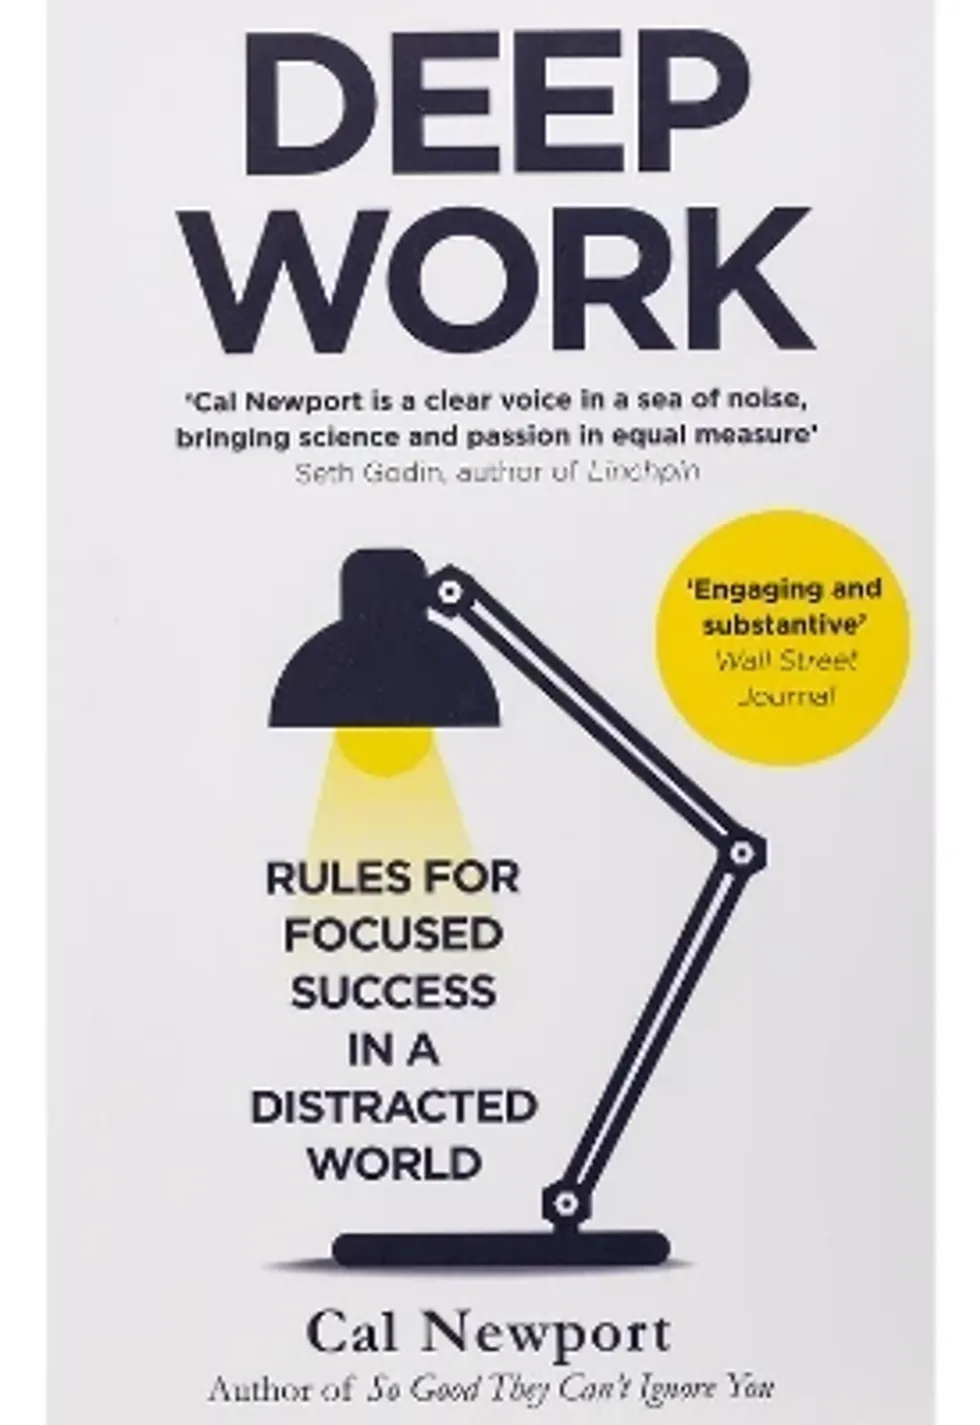 The front cover of the book "Deep Work: Rules for Focused Success in a Distracted World" by Cal Newport